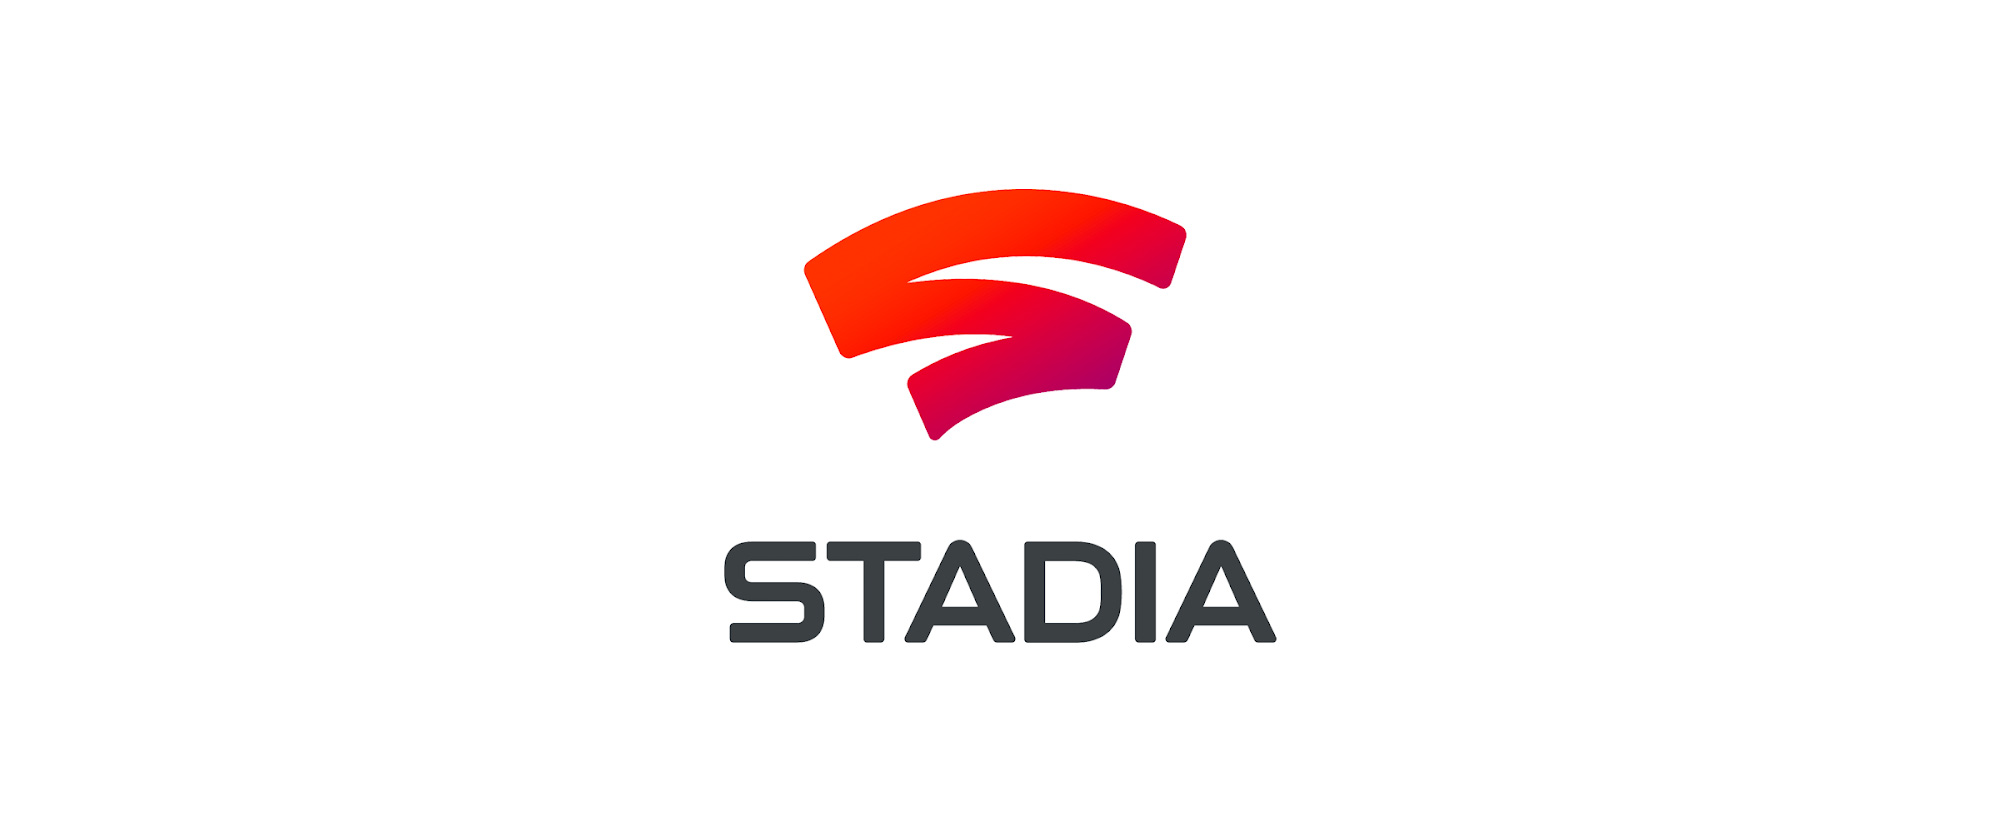 Google Stadia: The Future of Gaming?